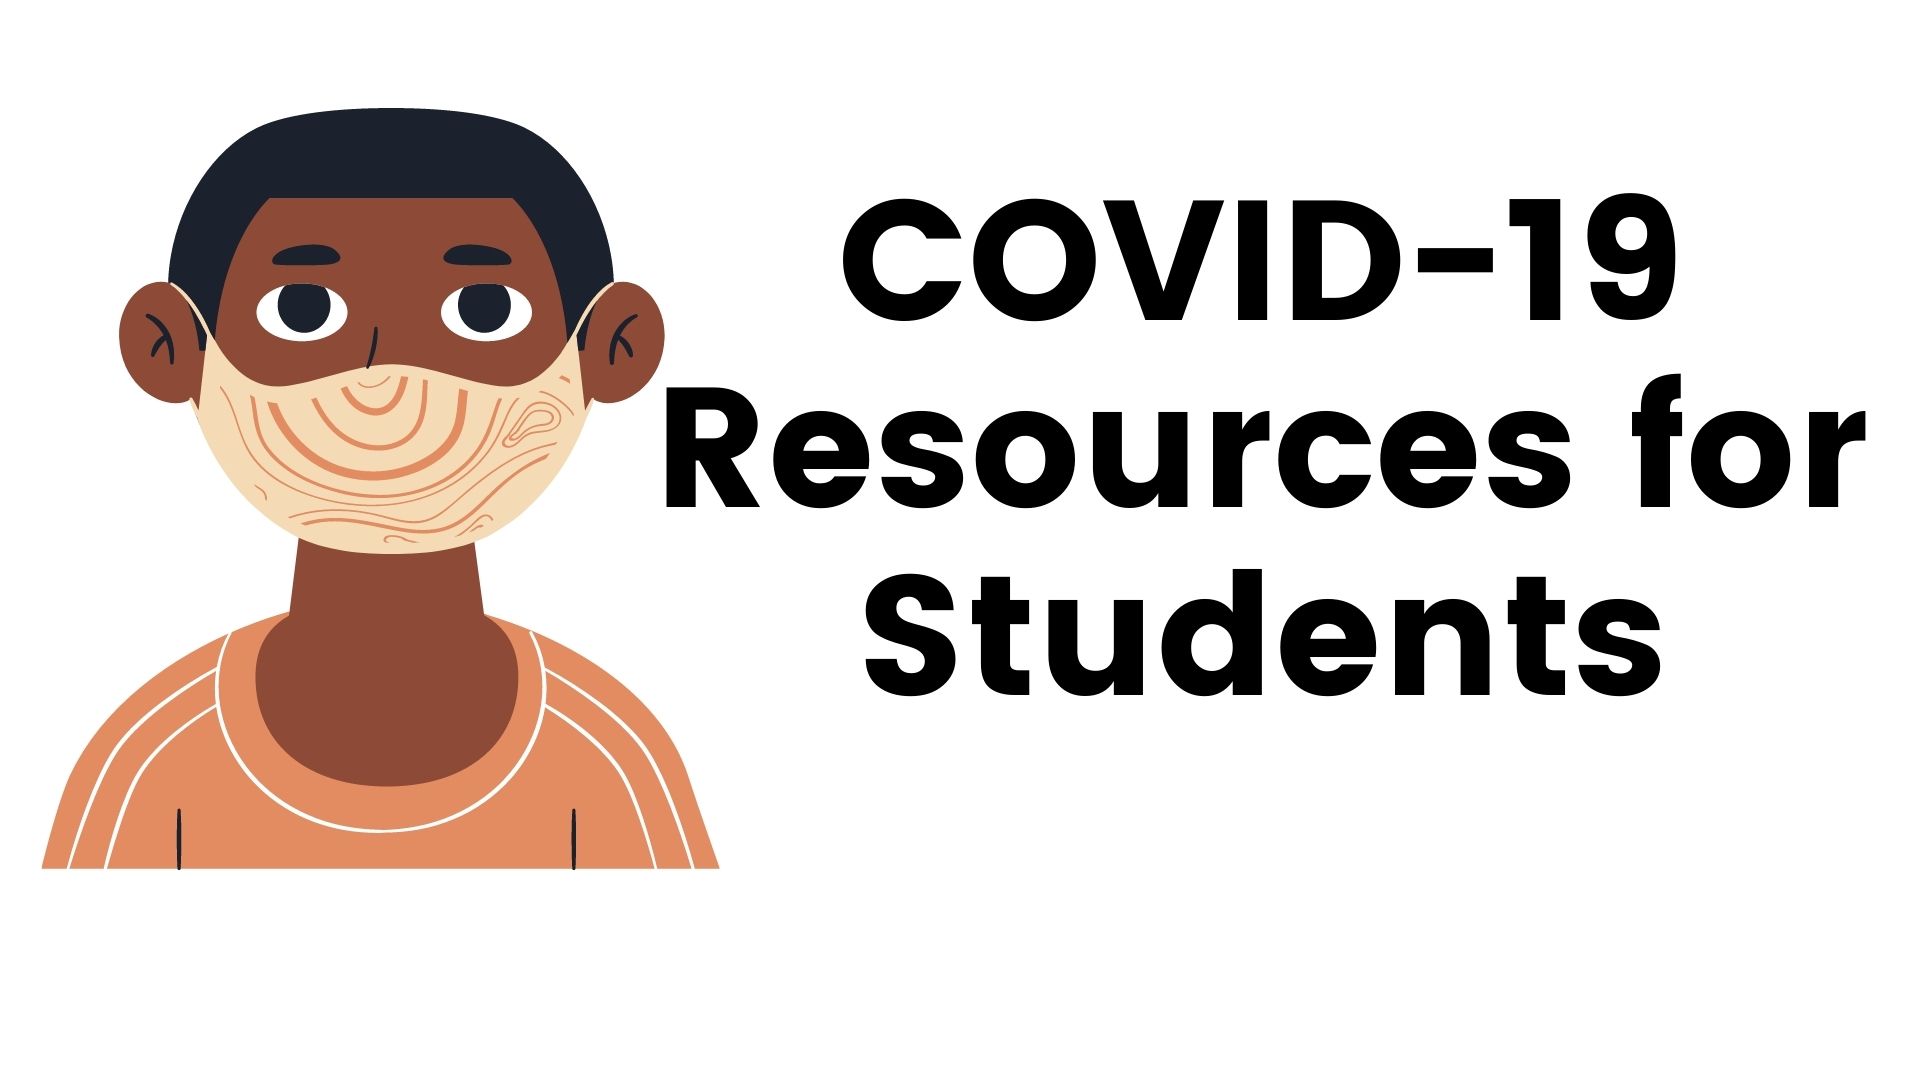 University COVID-19 Resources for students